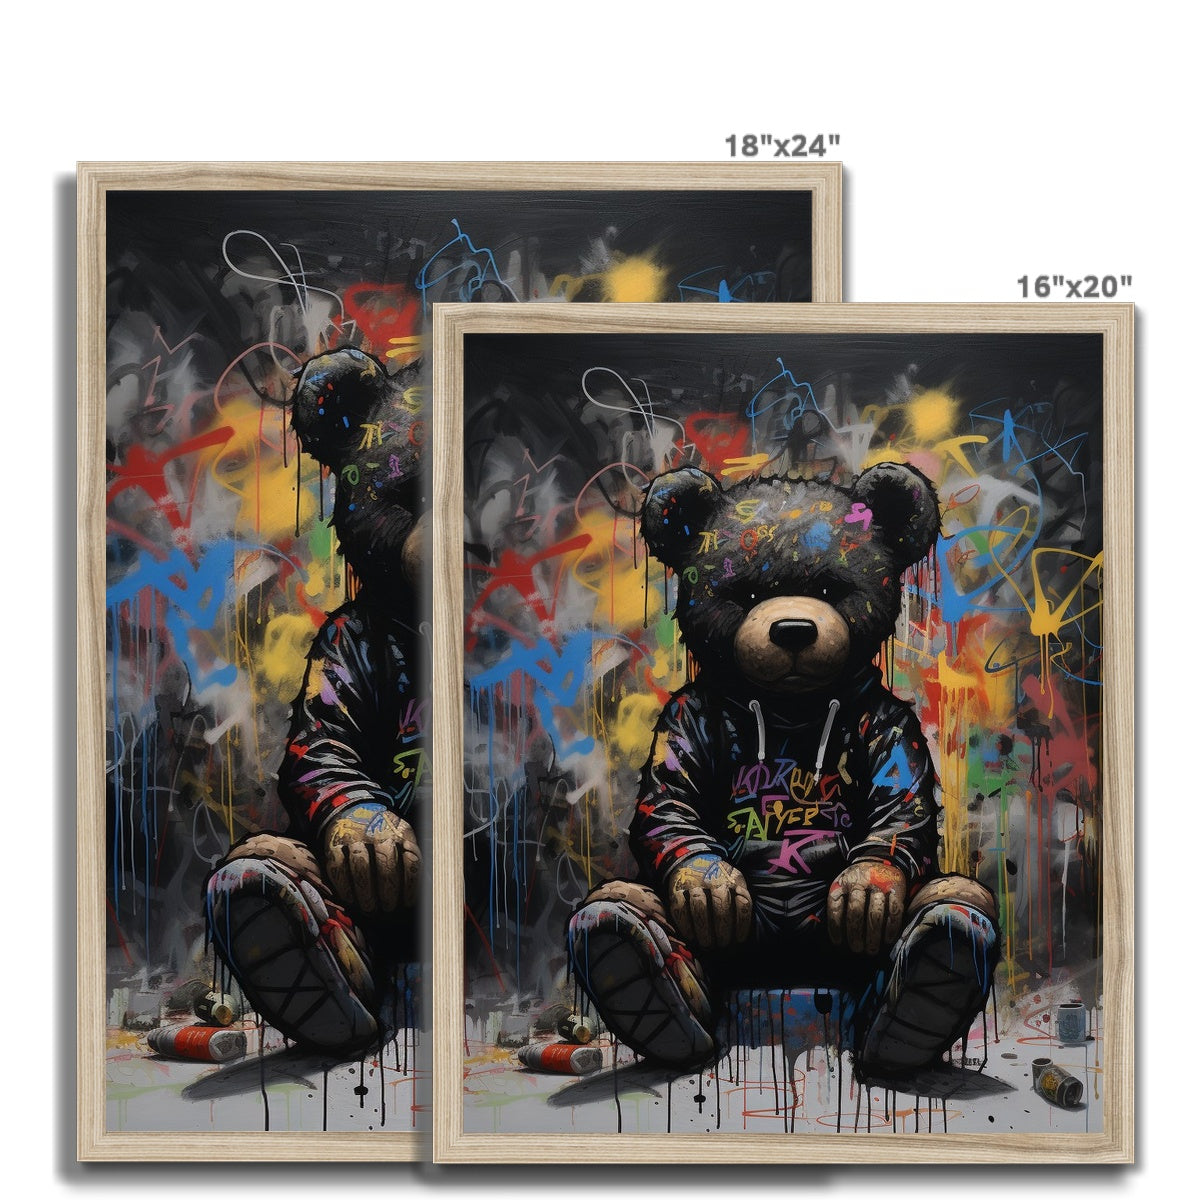 All Black Everything: Limited Edition Framed Print